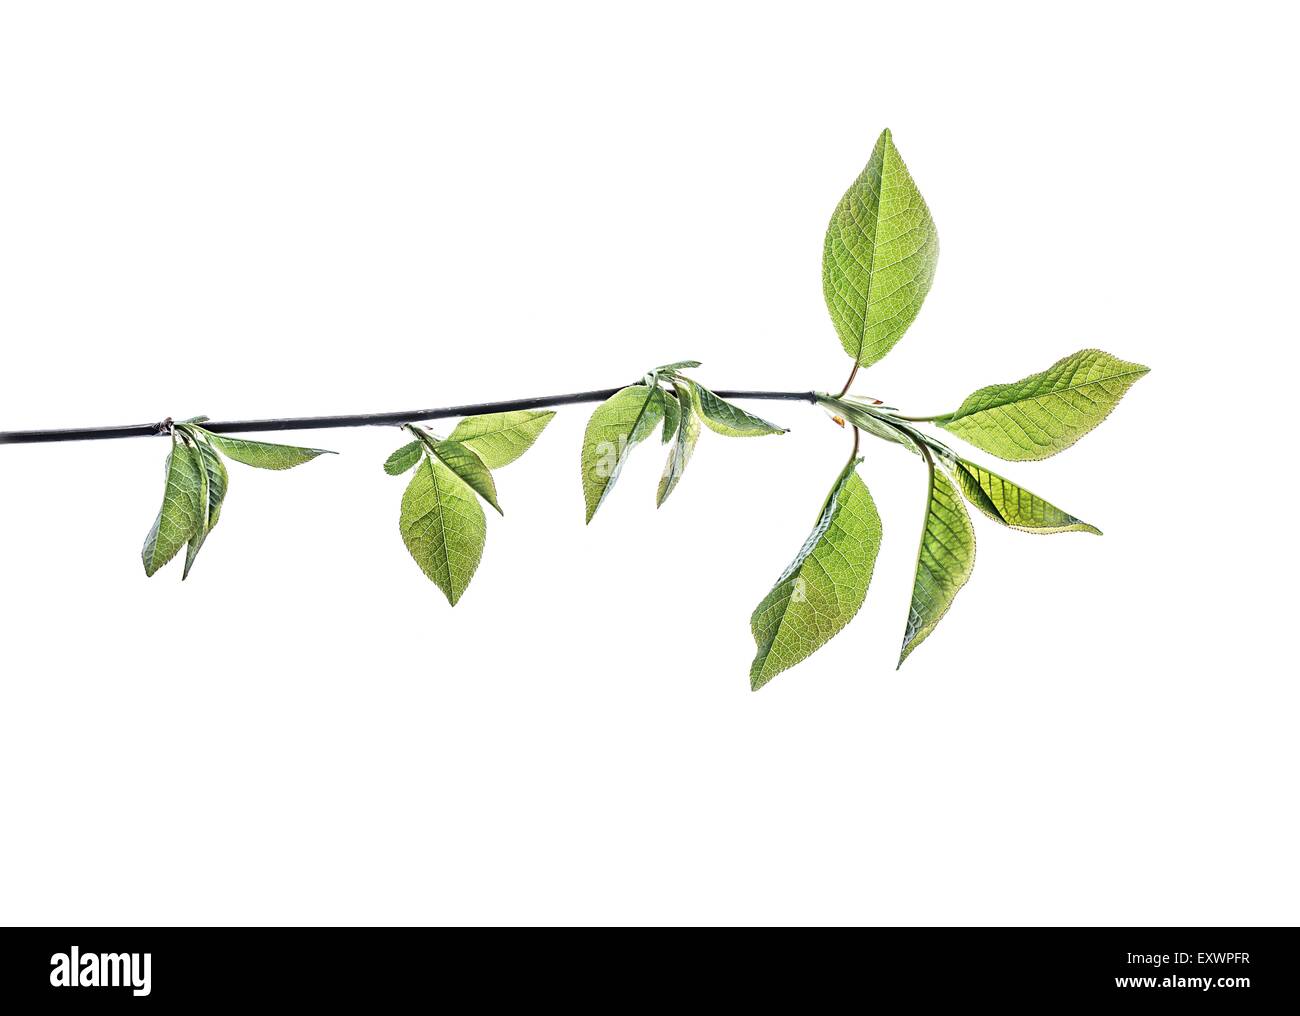 Twig with green leaves Stock Photo